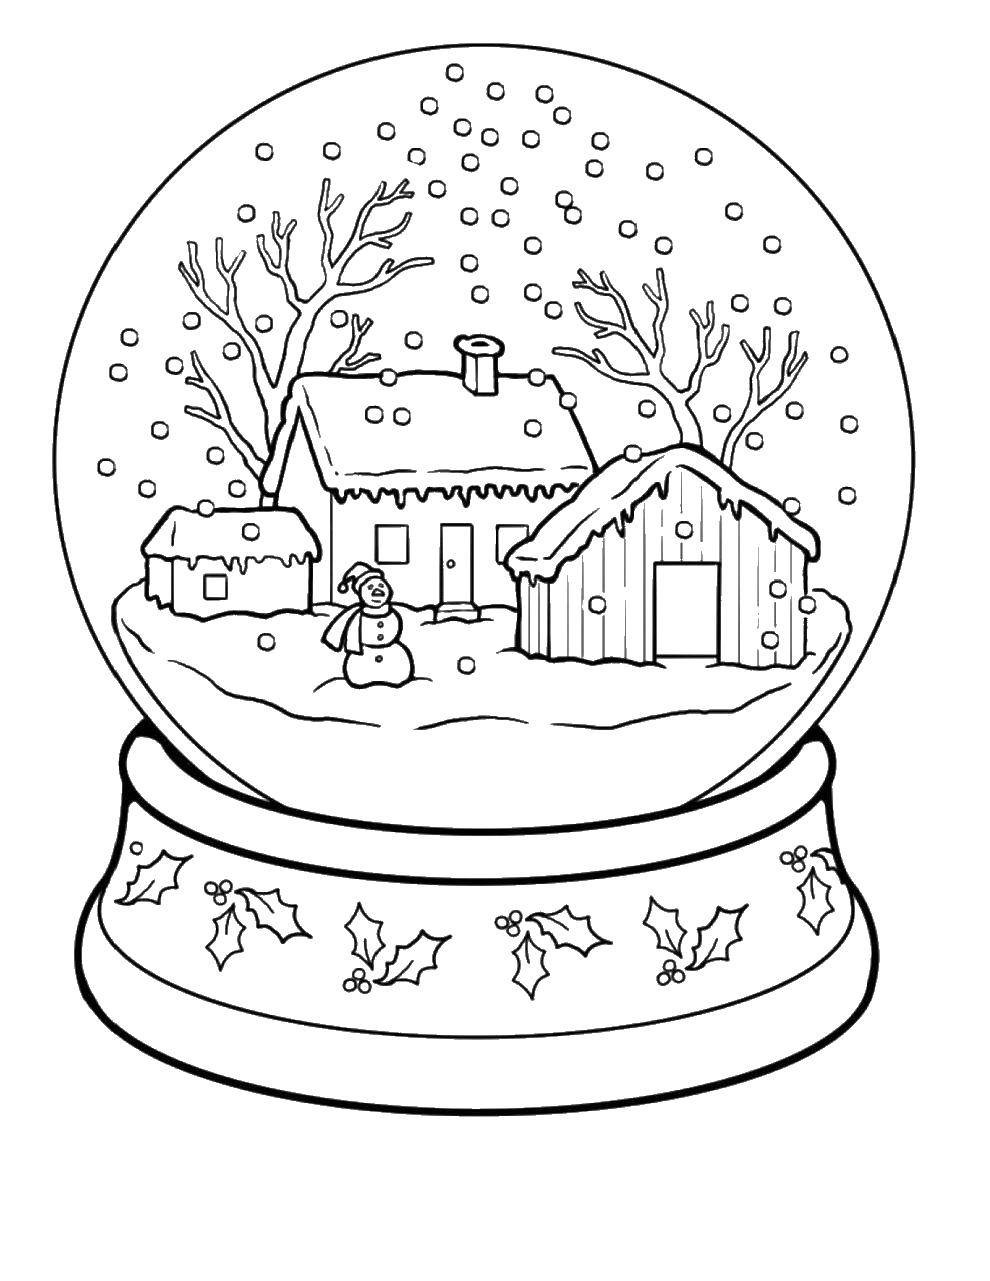 Coloring Glass ball with snowman. Category coloring winter. Tags:  snowman, winter, new year, bowl.